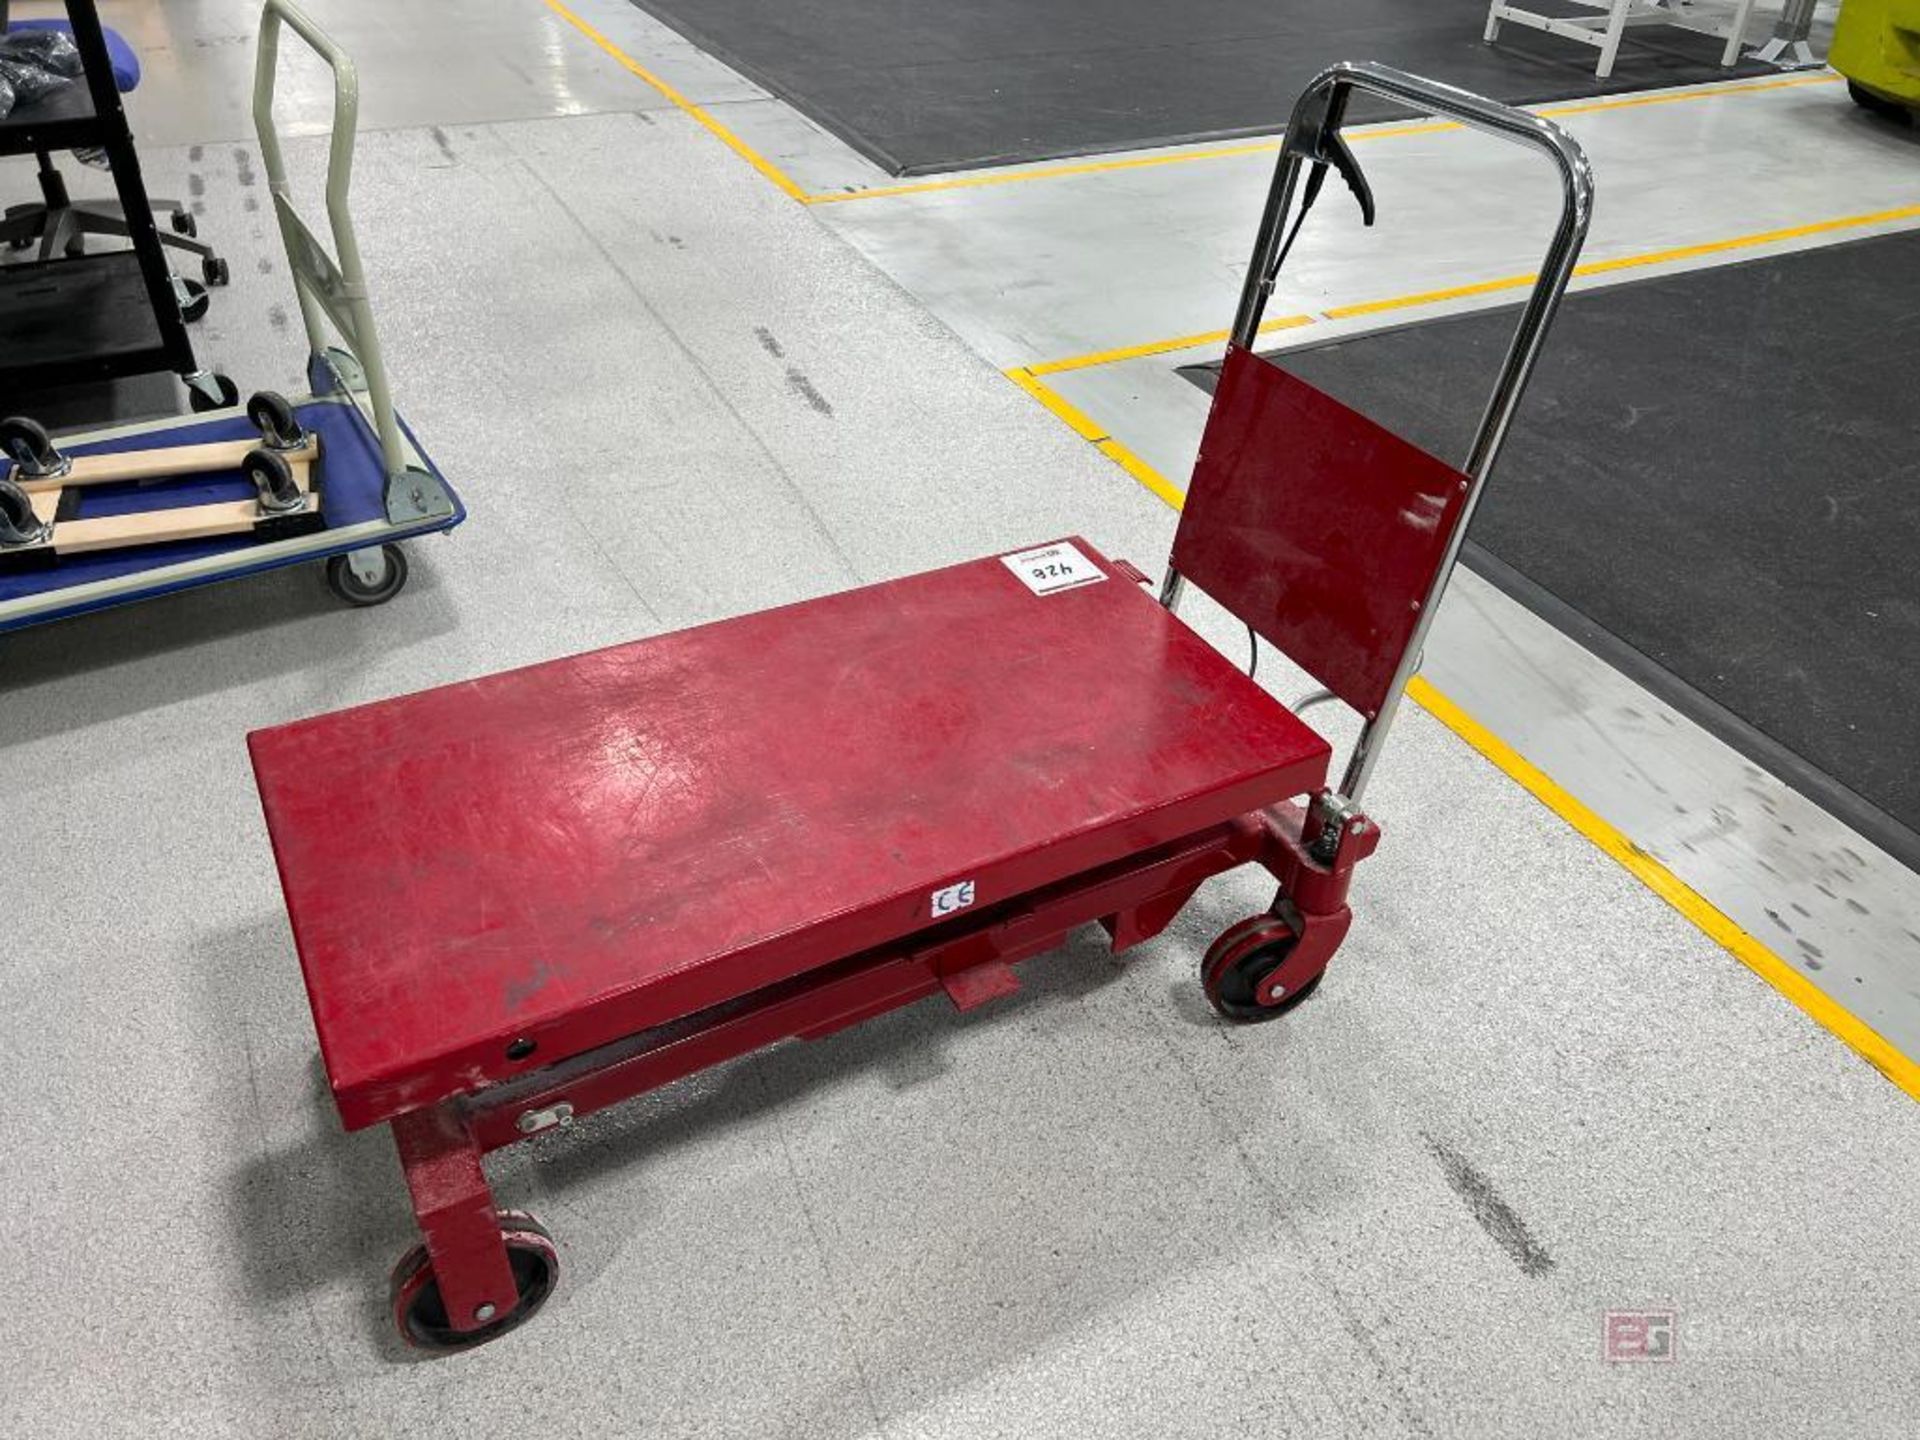 Uline Portable Manual Hydraulic Lift Table - Image 2 of 2